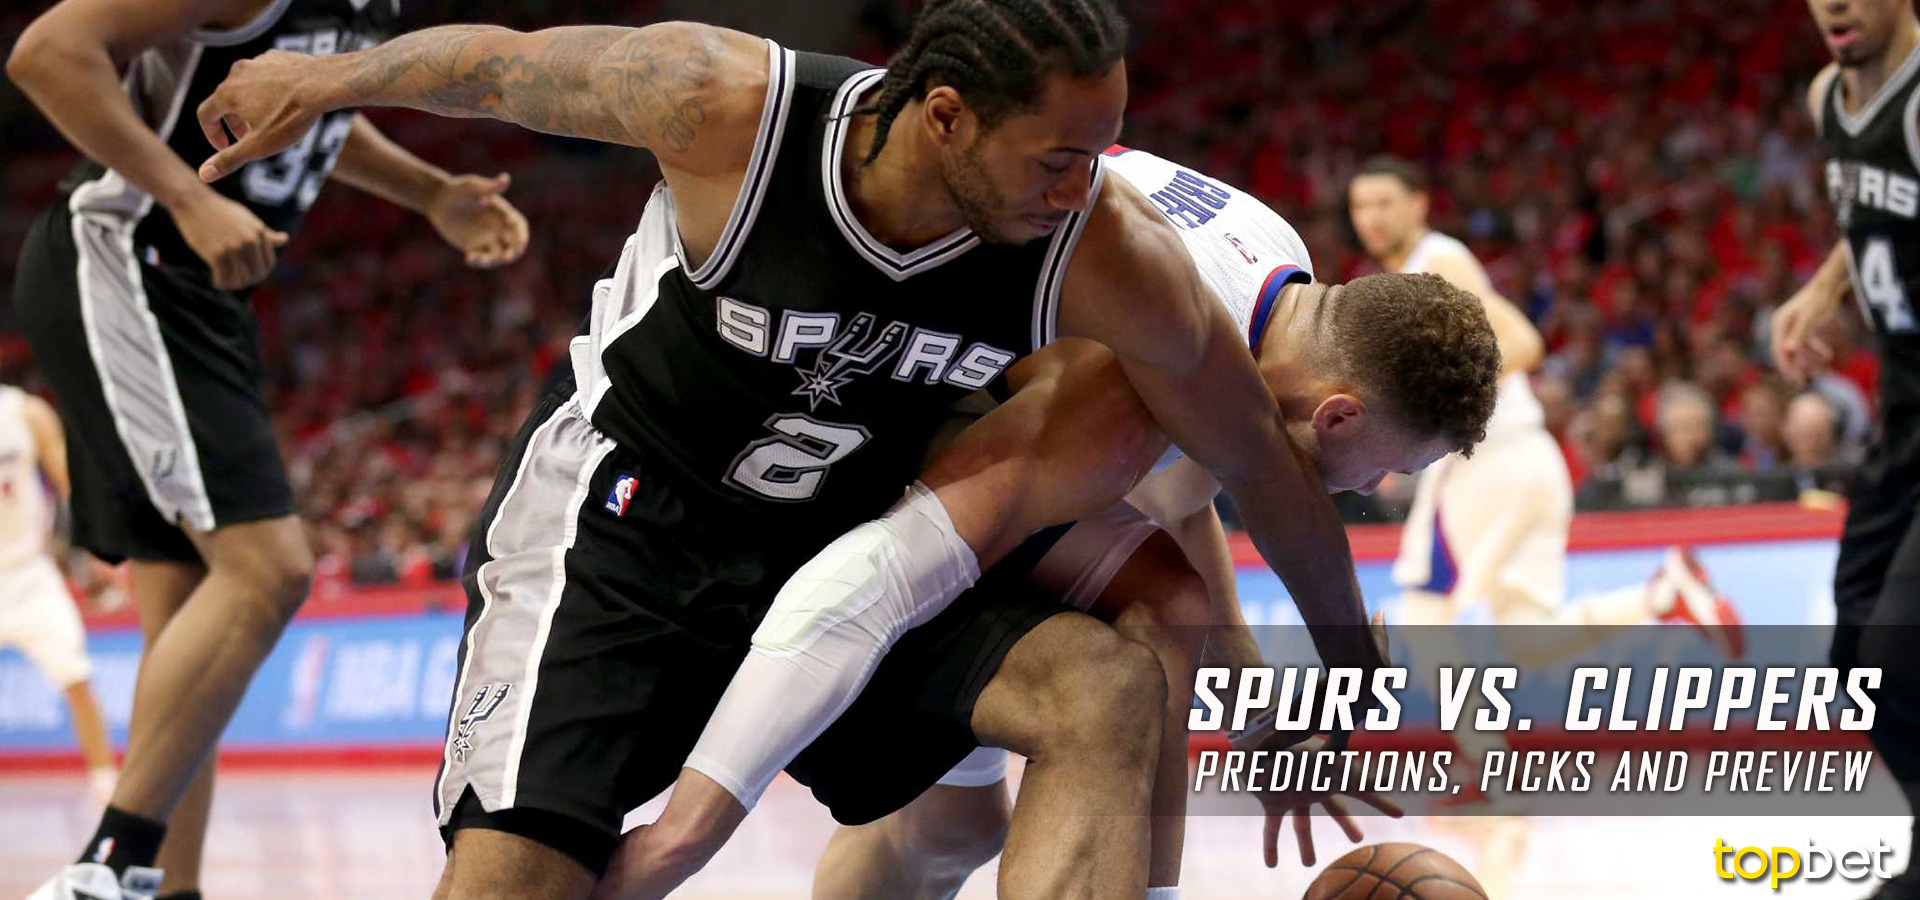 Spurs vs Clippers Predictions and Preview – February 2017